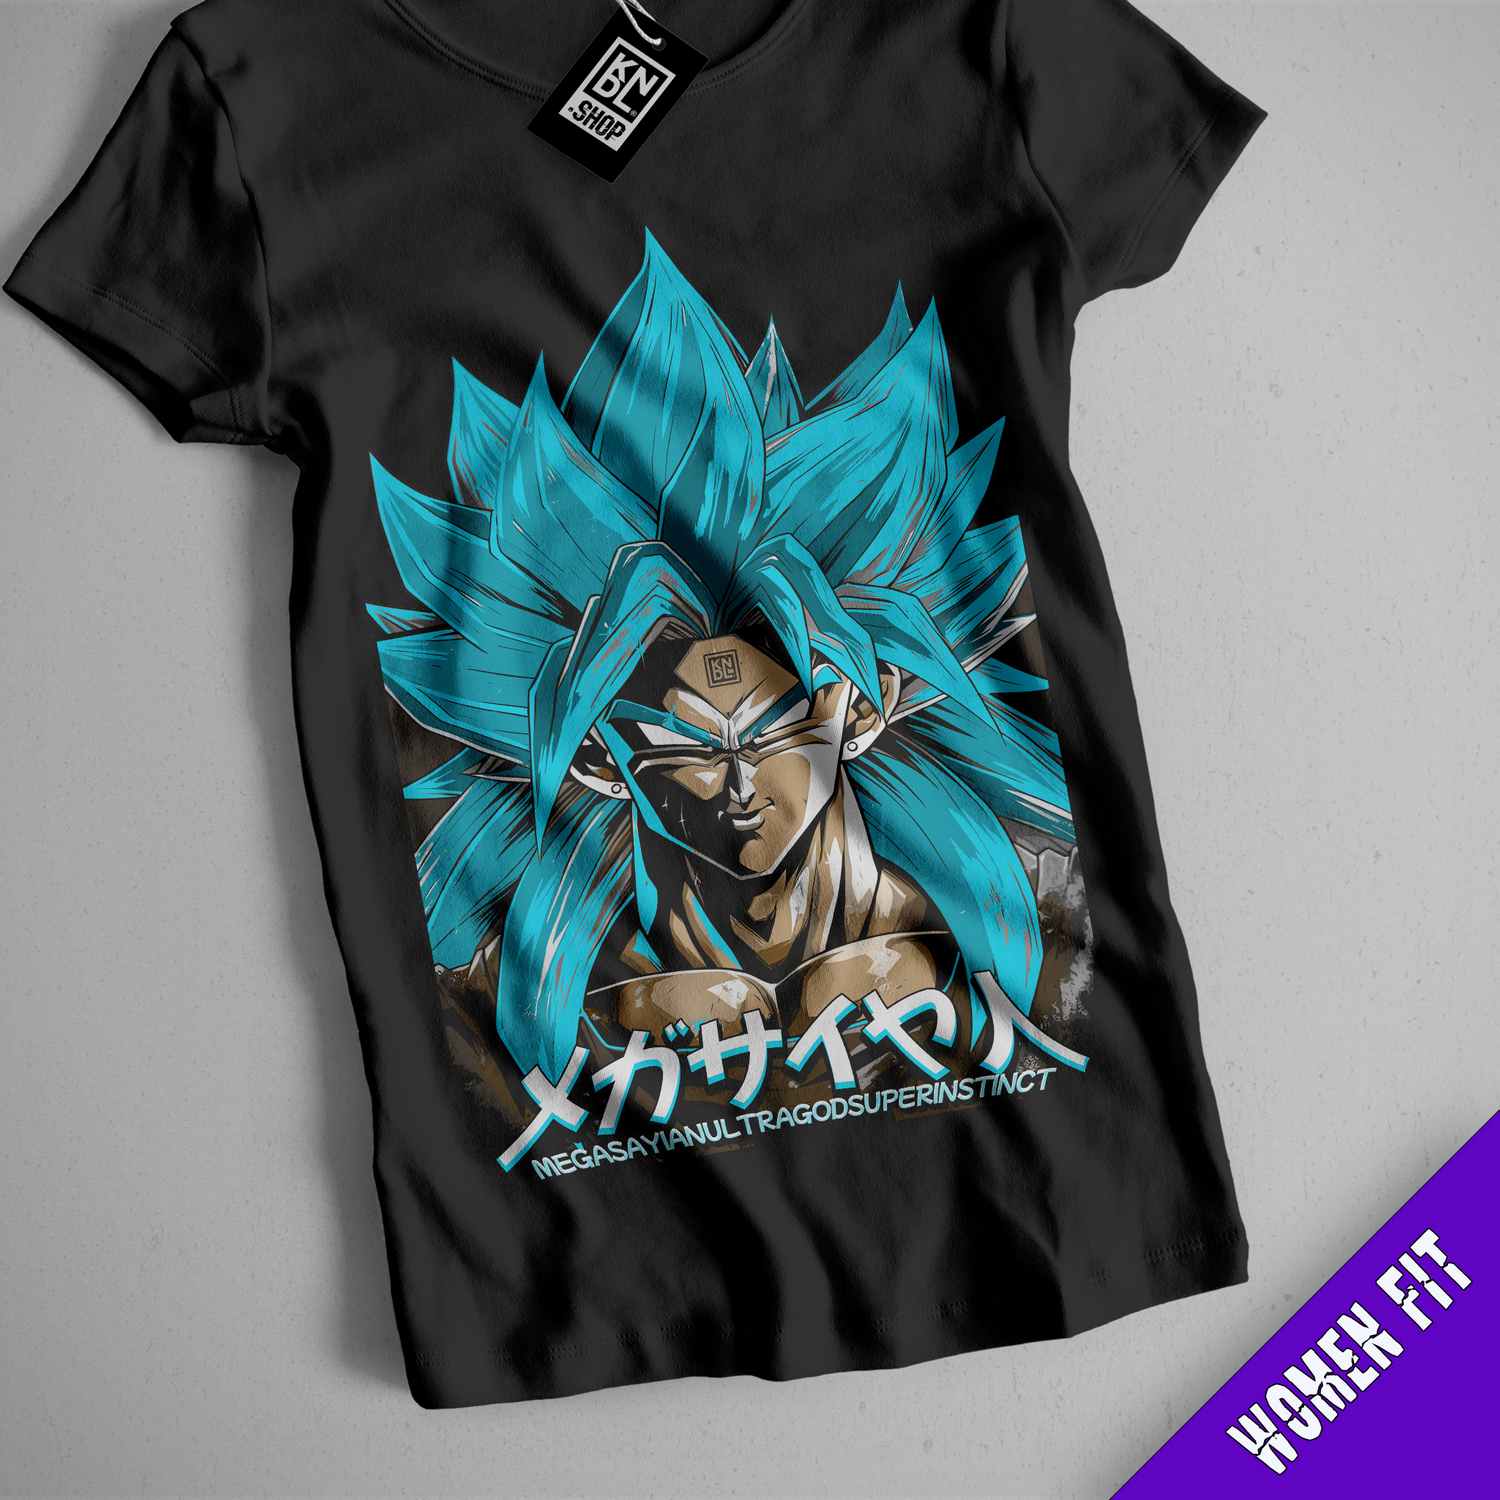 a black shirt with a picture of the character gohan